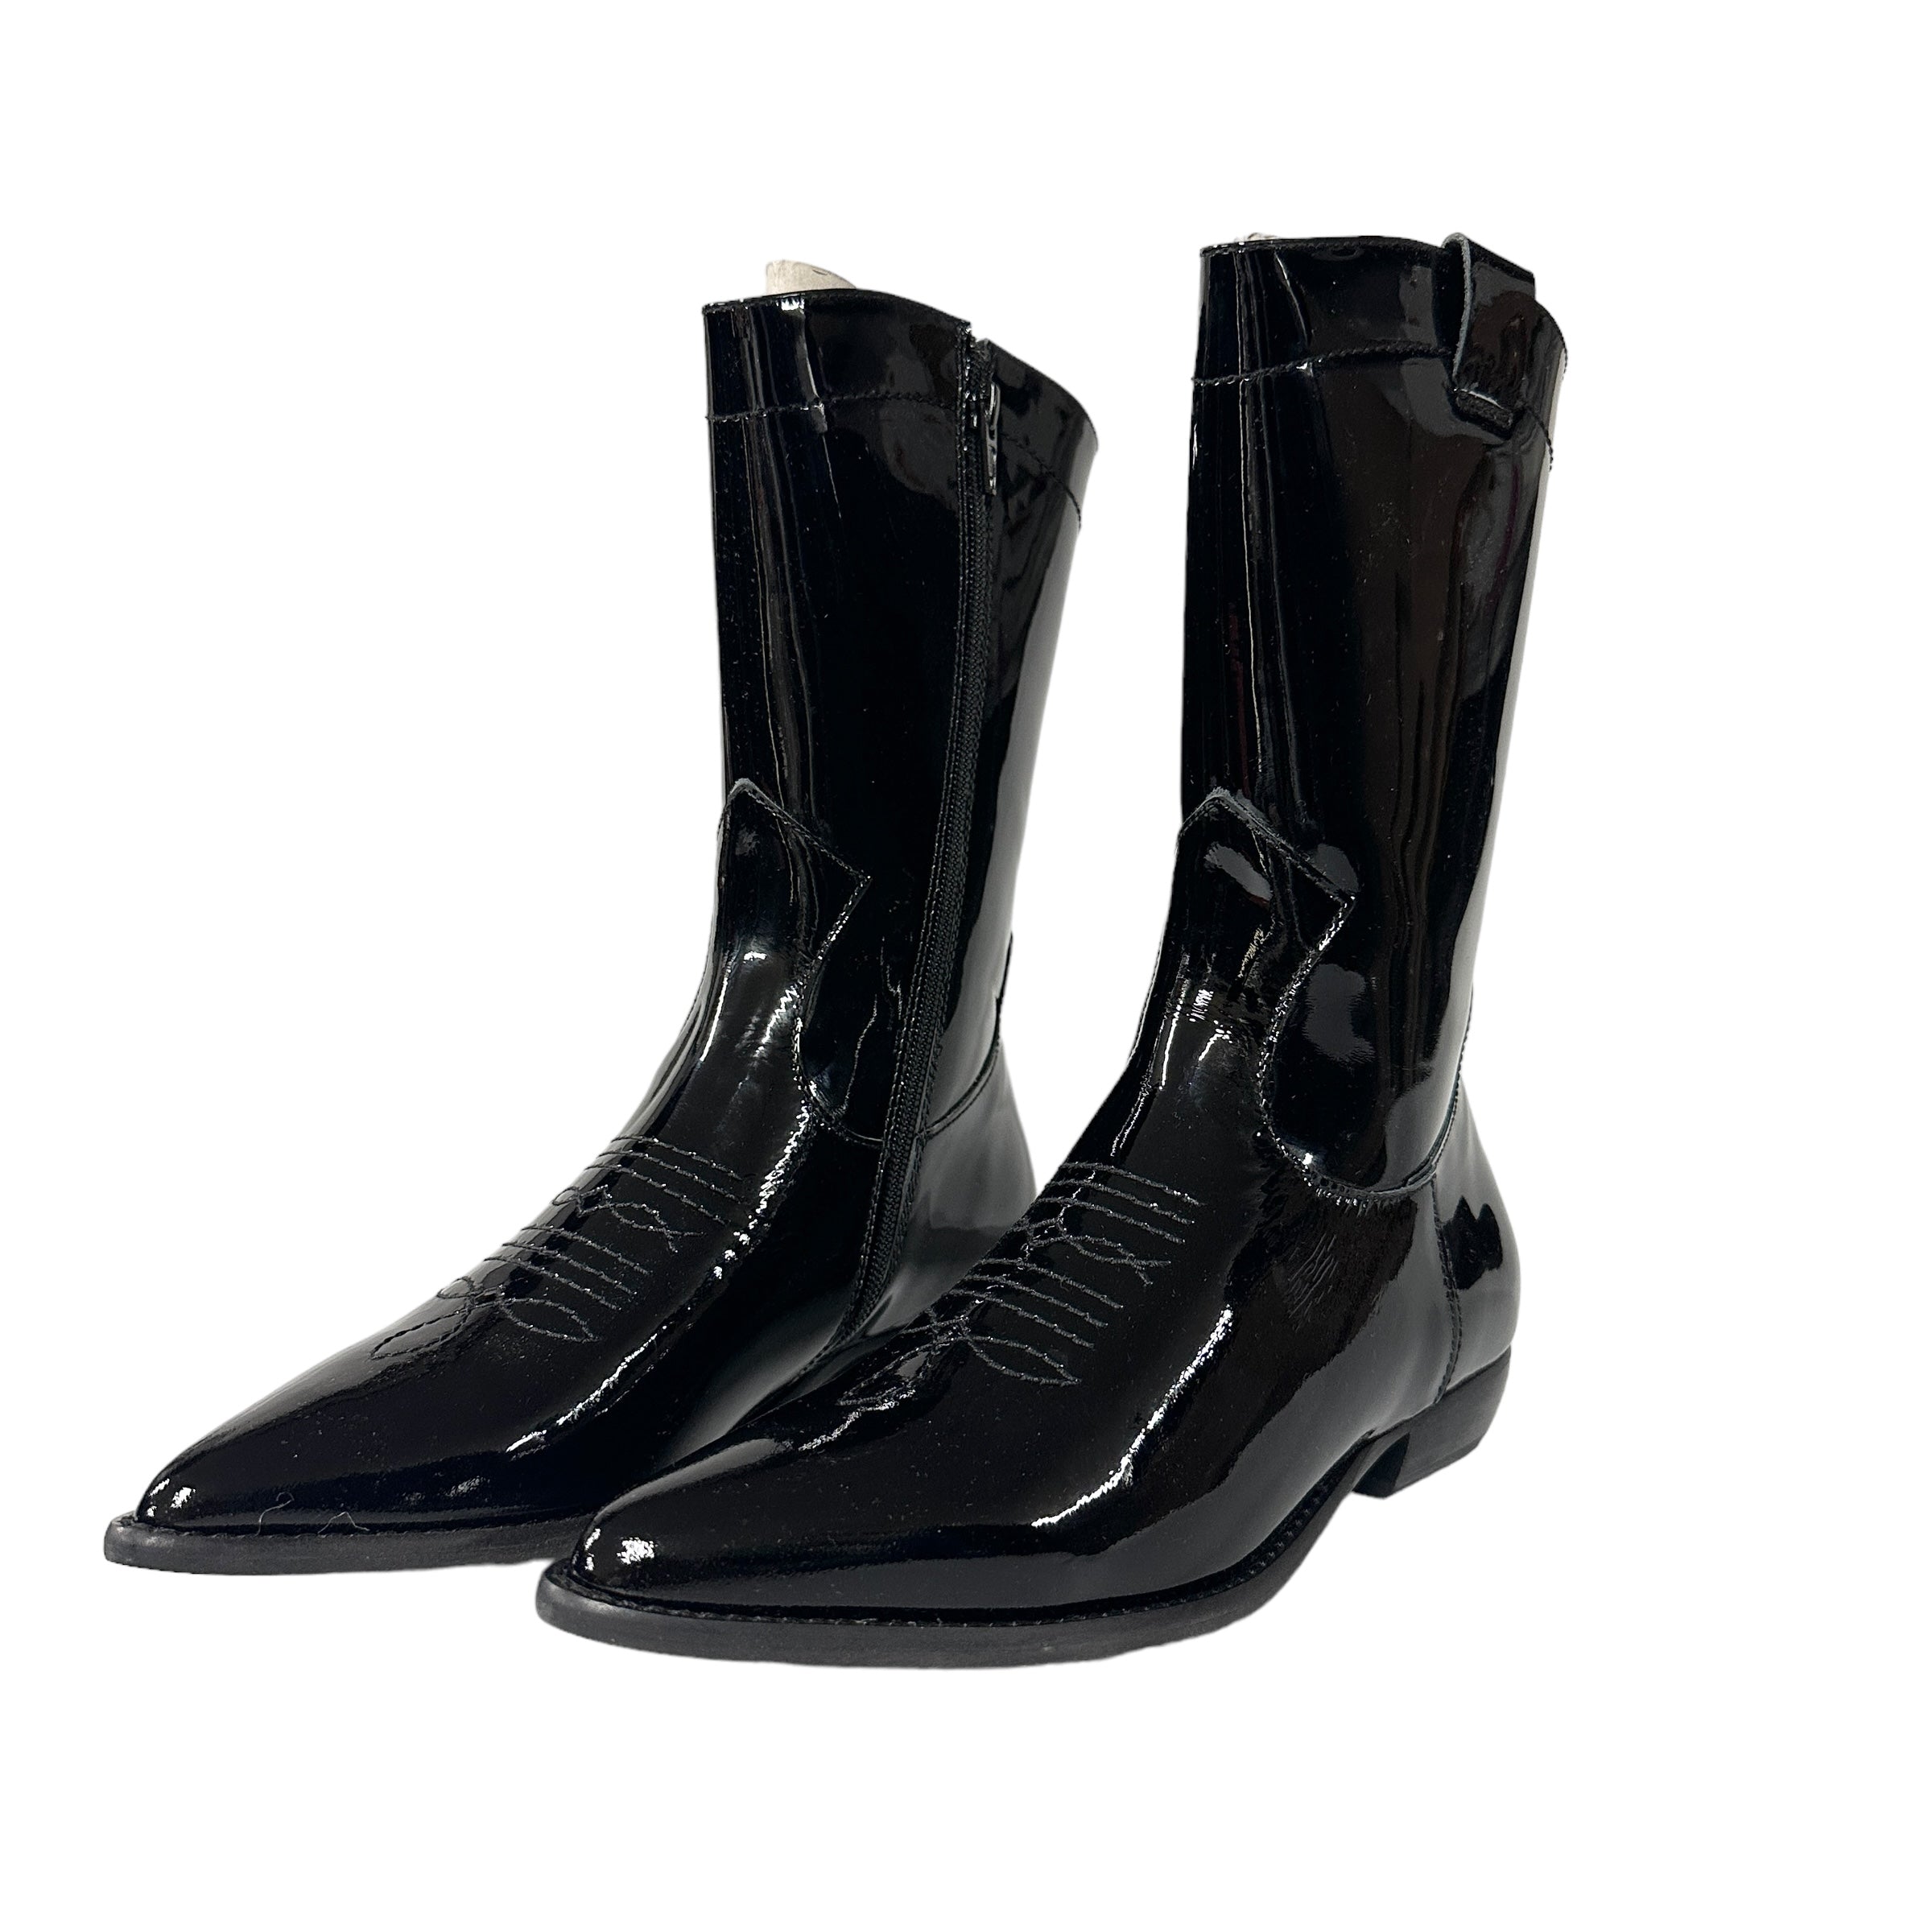 E8 BY MIISTA Patent leather boots / Black